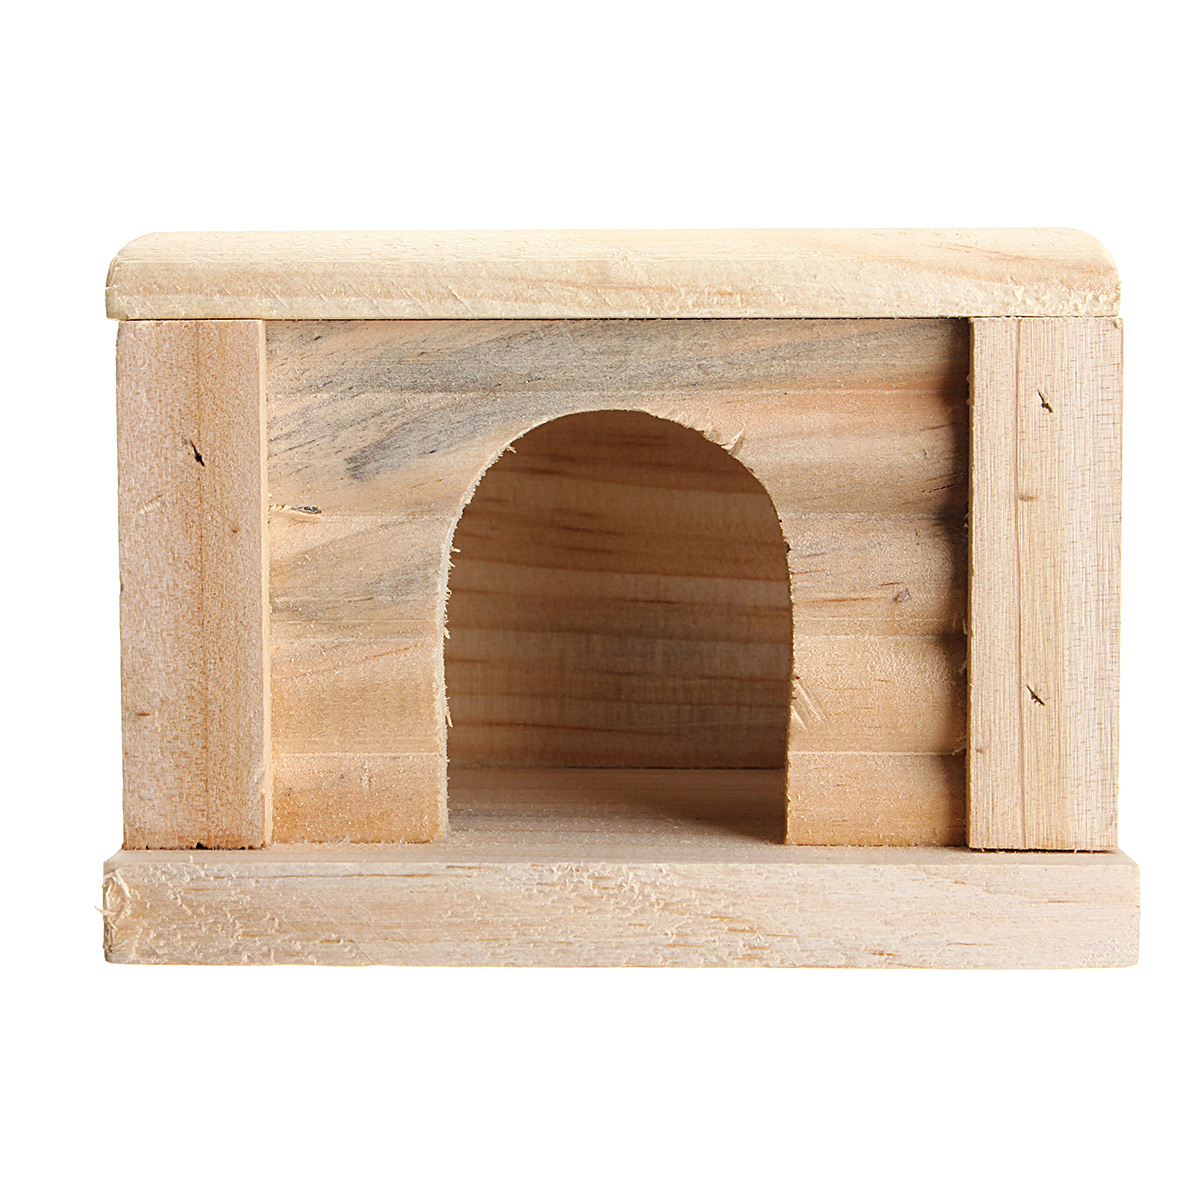 Toy-Wooden-Hamster-House-Bedroom-Dwarf-Cage-Rat-Mouse-Gerbil-Exercise-Natural-1128636